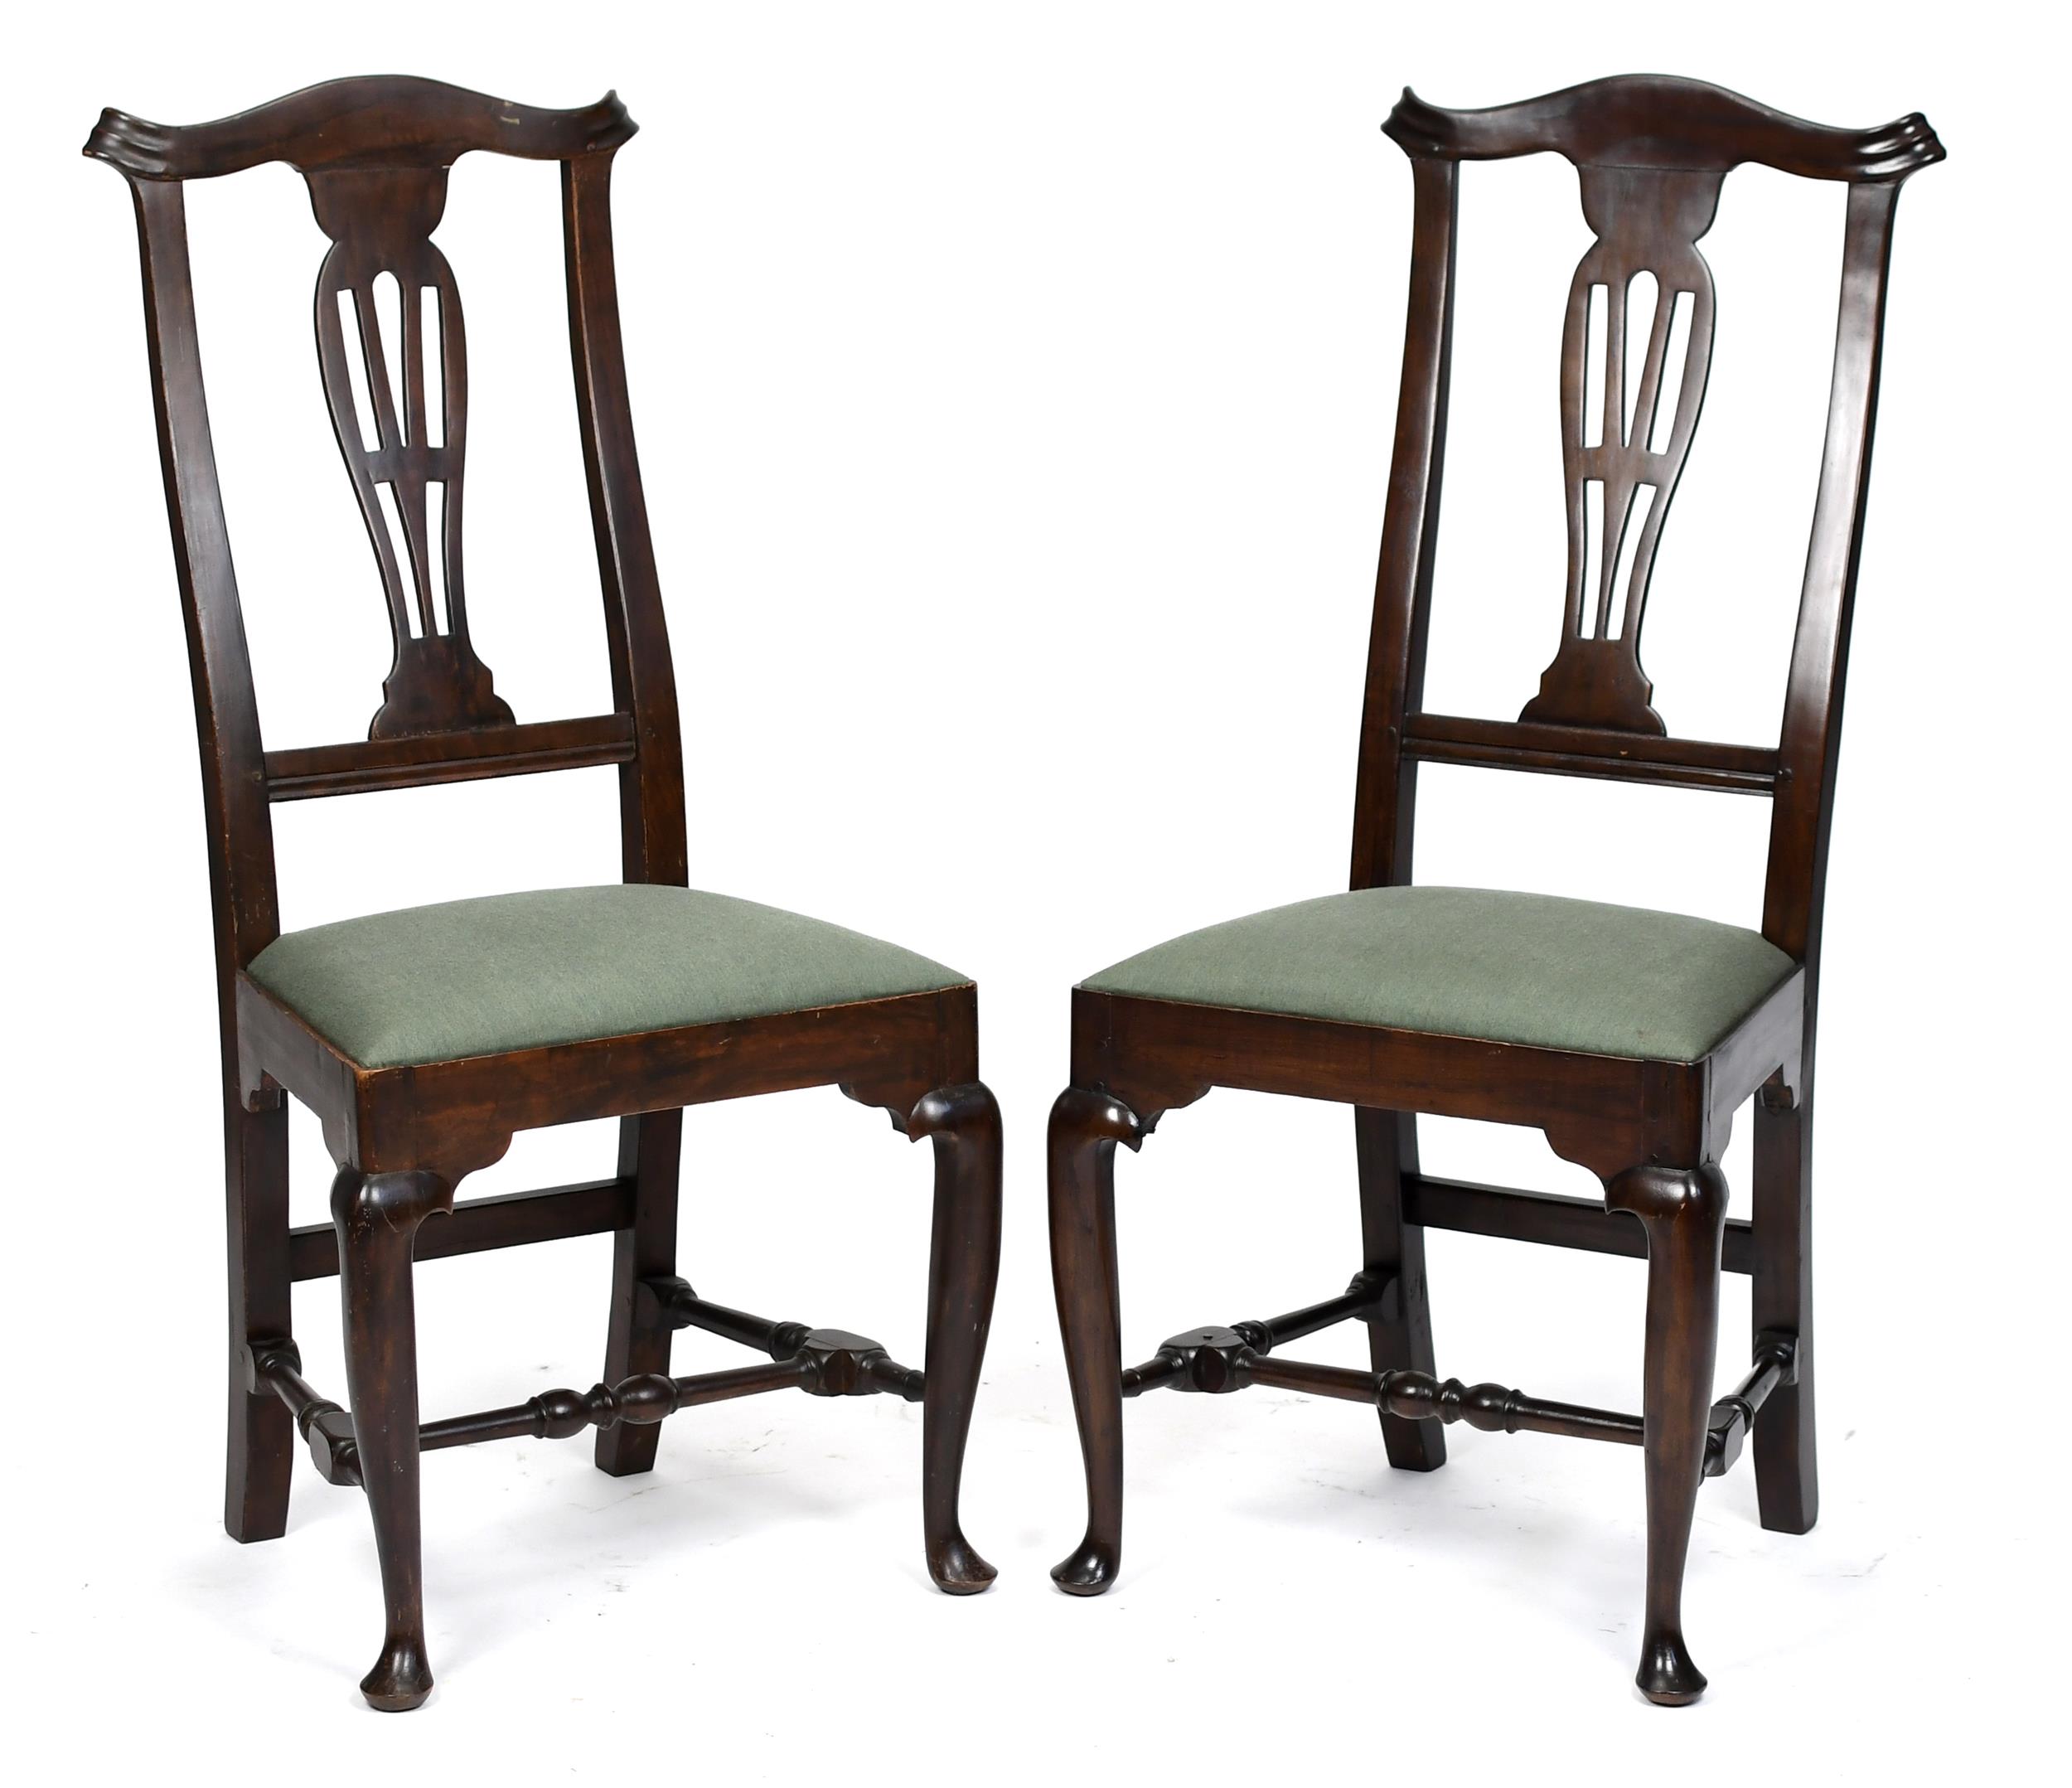 PAIR OF 18TH C. QUEEN ANNE SIDE